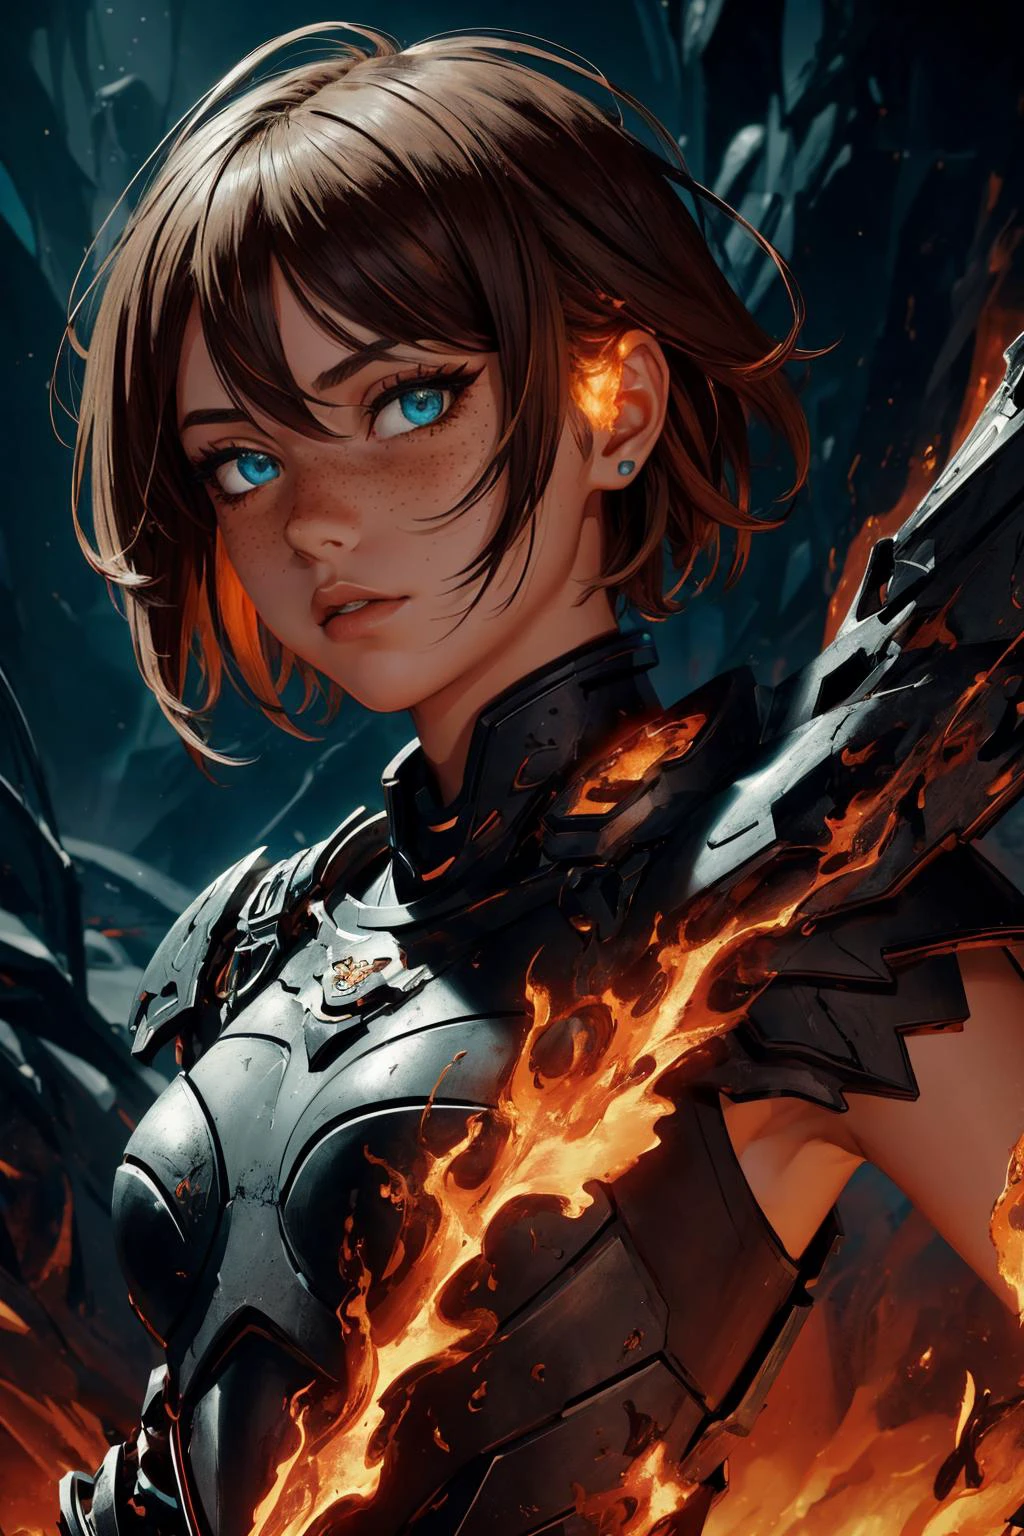 maximum details, cinematic, (abstract art:1.1), dark theme, stylized, deep shadow, 1 girl, adult  woman, freckles, turquoise eyes, medium blonde short hair, 
  solo, upper body, detailed background, detailed face, (lava, MagmaTech theme:1.1)   (mouth open:0.65), elemental fiery armored fighter, [heavy armor:molten rock:2], covered in molten rock, ruby gemstone,  magma, cracks, heat,     obsidian in background,   cinematic fiery atmosphere,
